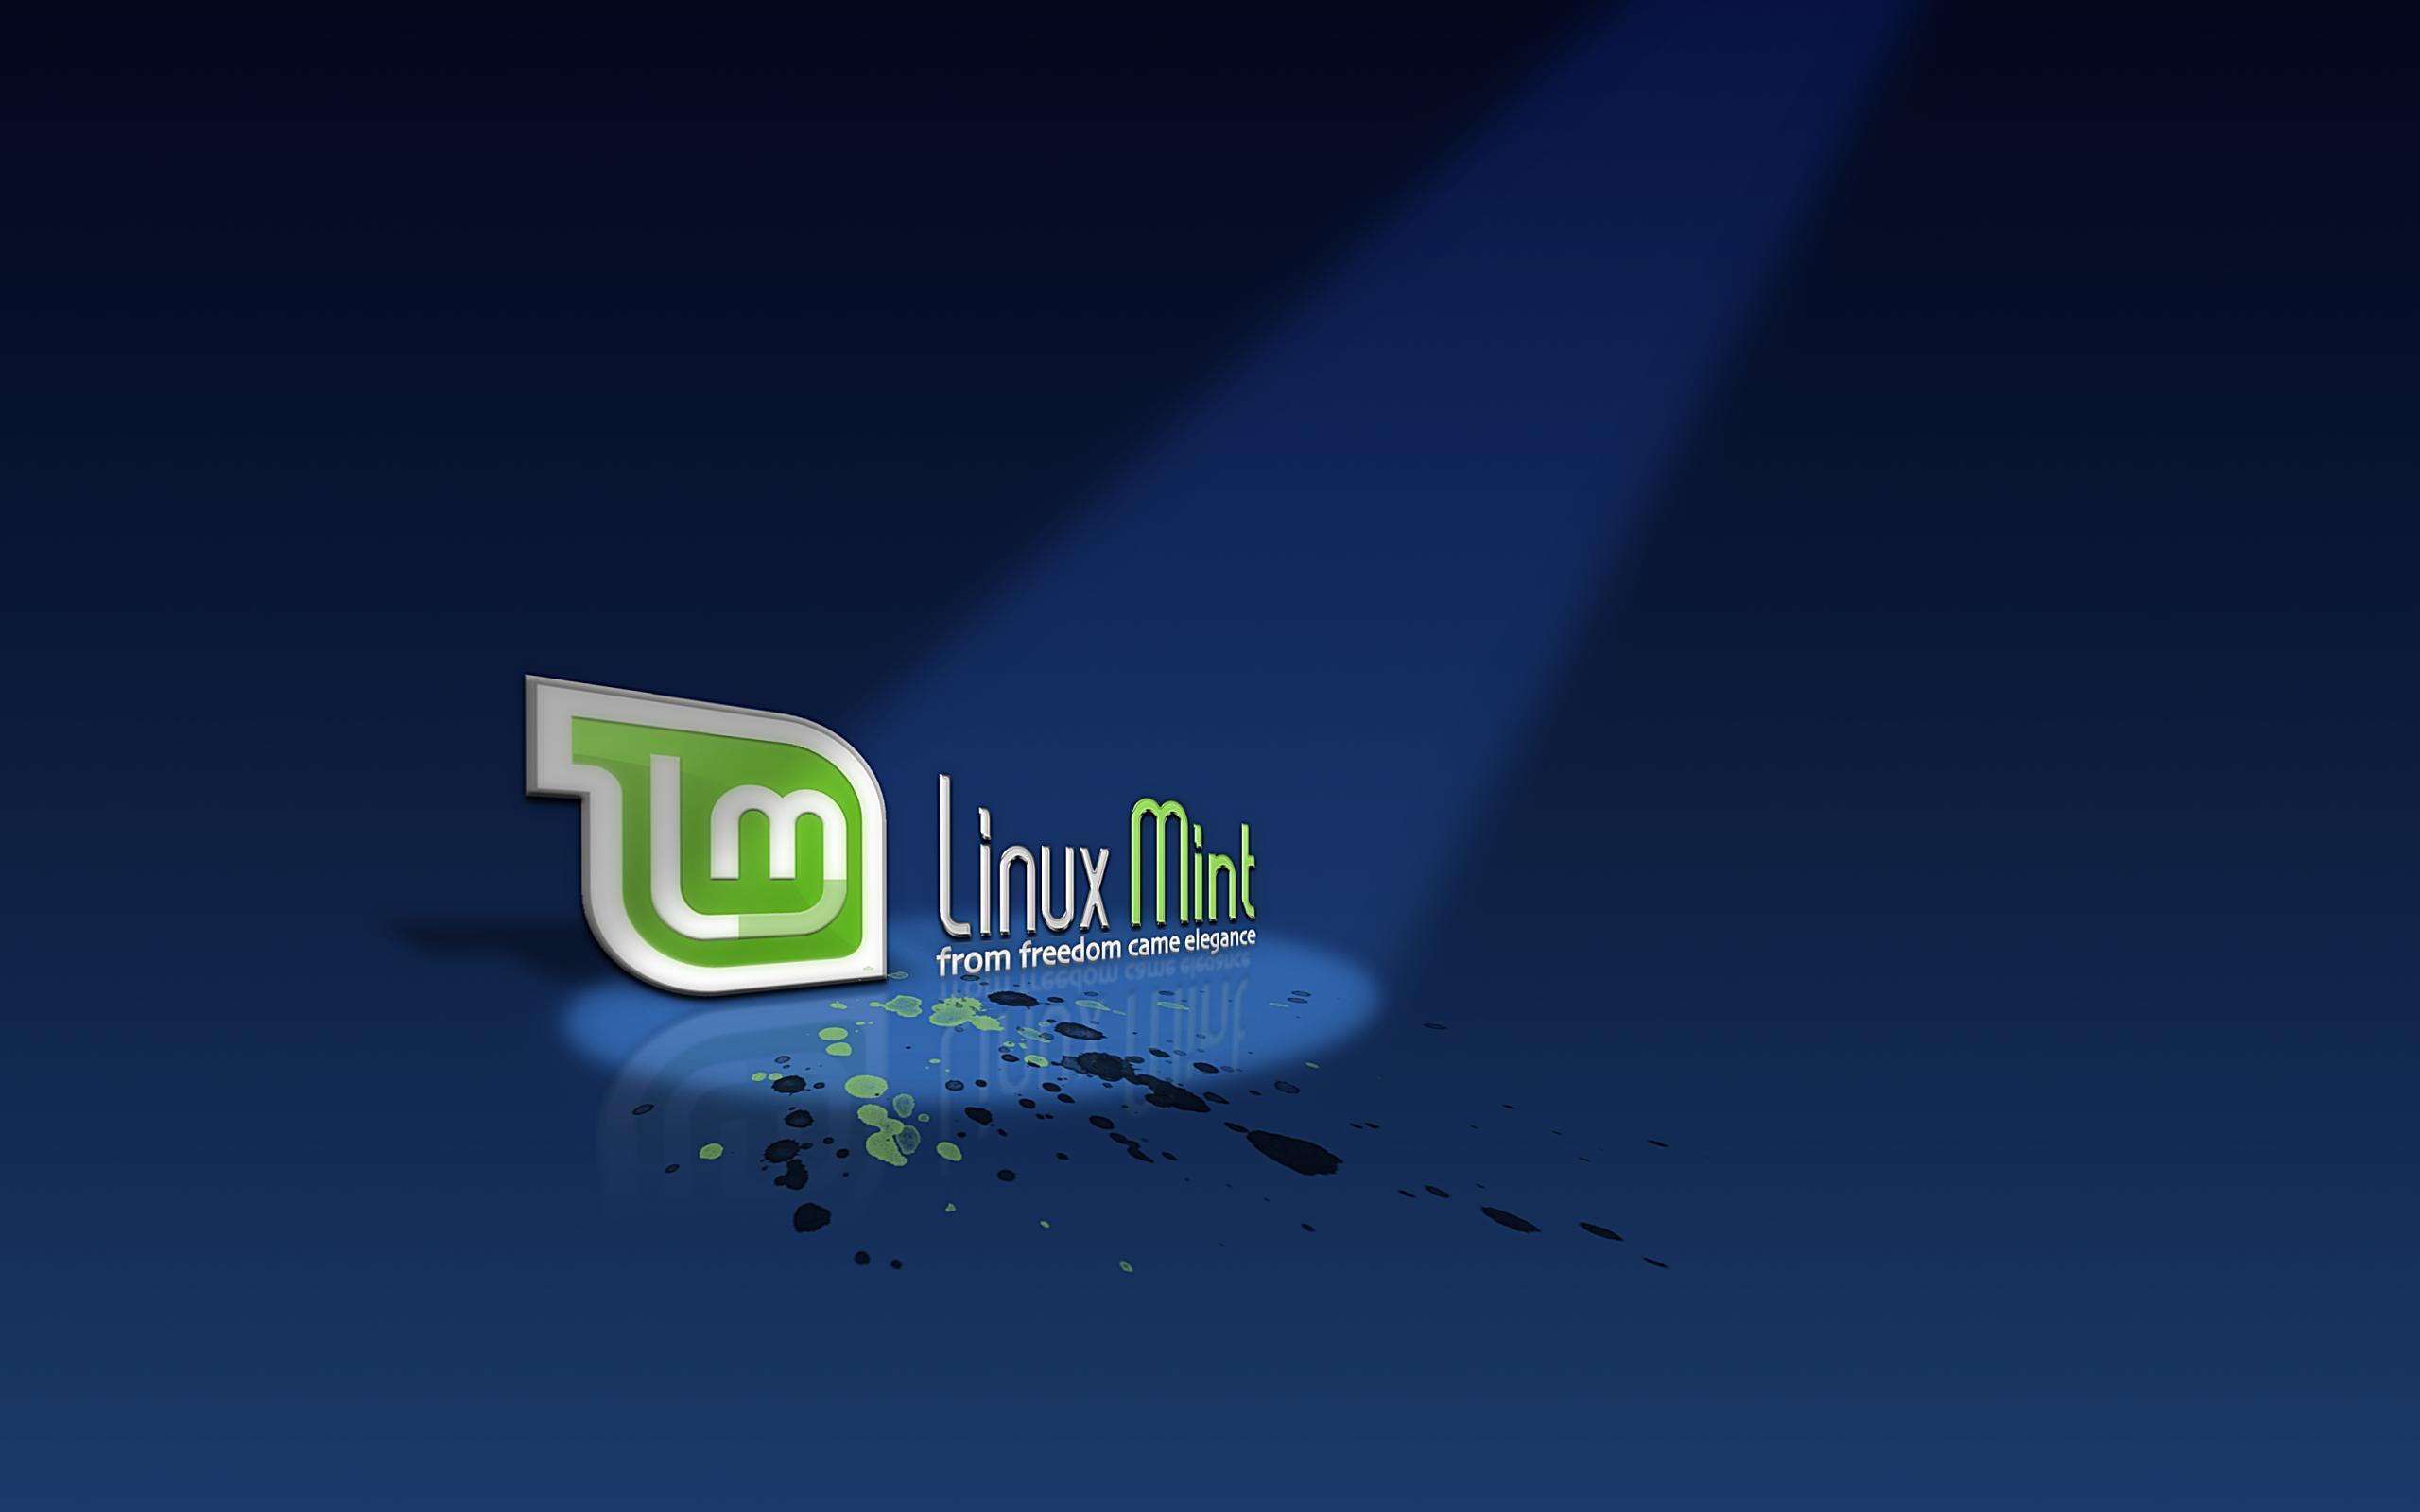 Linux Mint Wallpapers 2560x1440 Hd Wallpapers